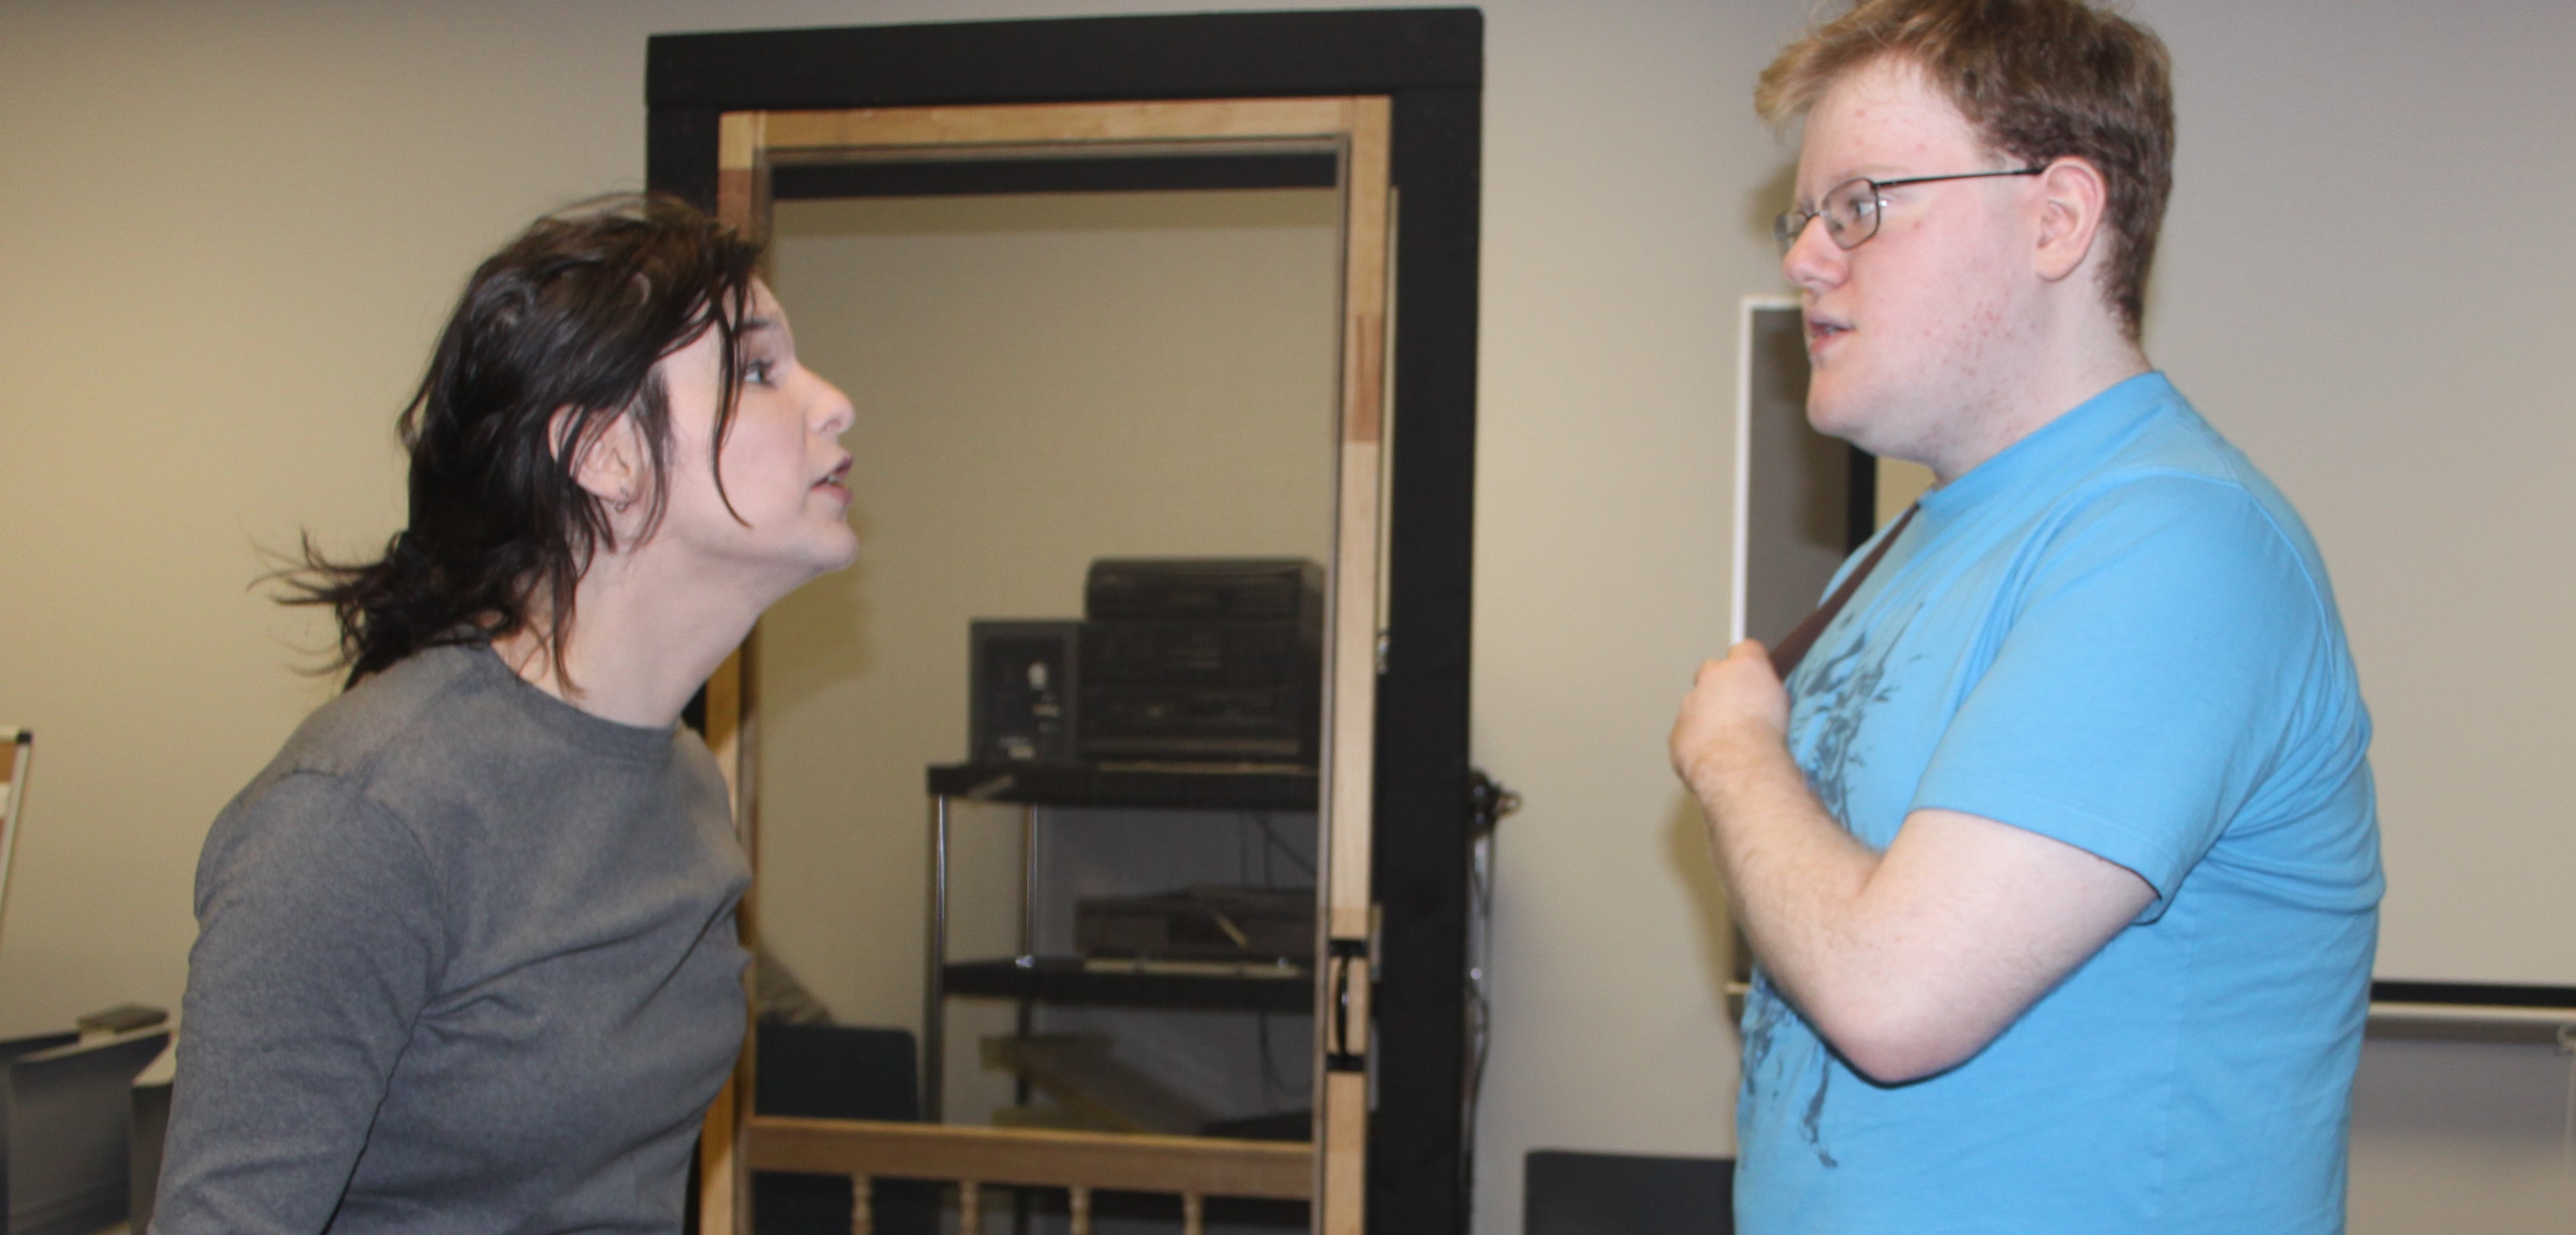 Columbus State students Reagan Hyer, on the left, and Will Settemberino, rehearse a scene from “Proof” on March 1